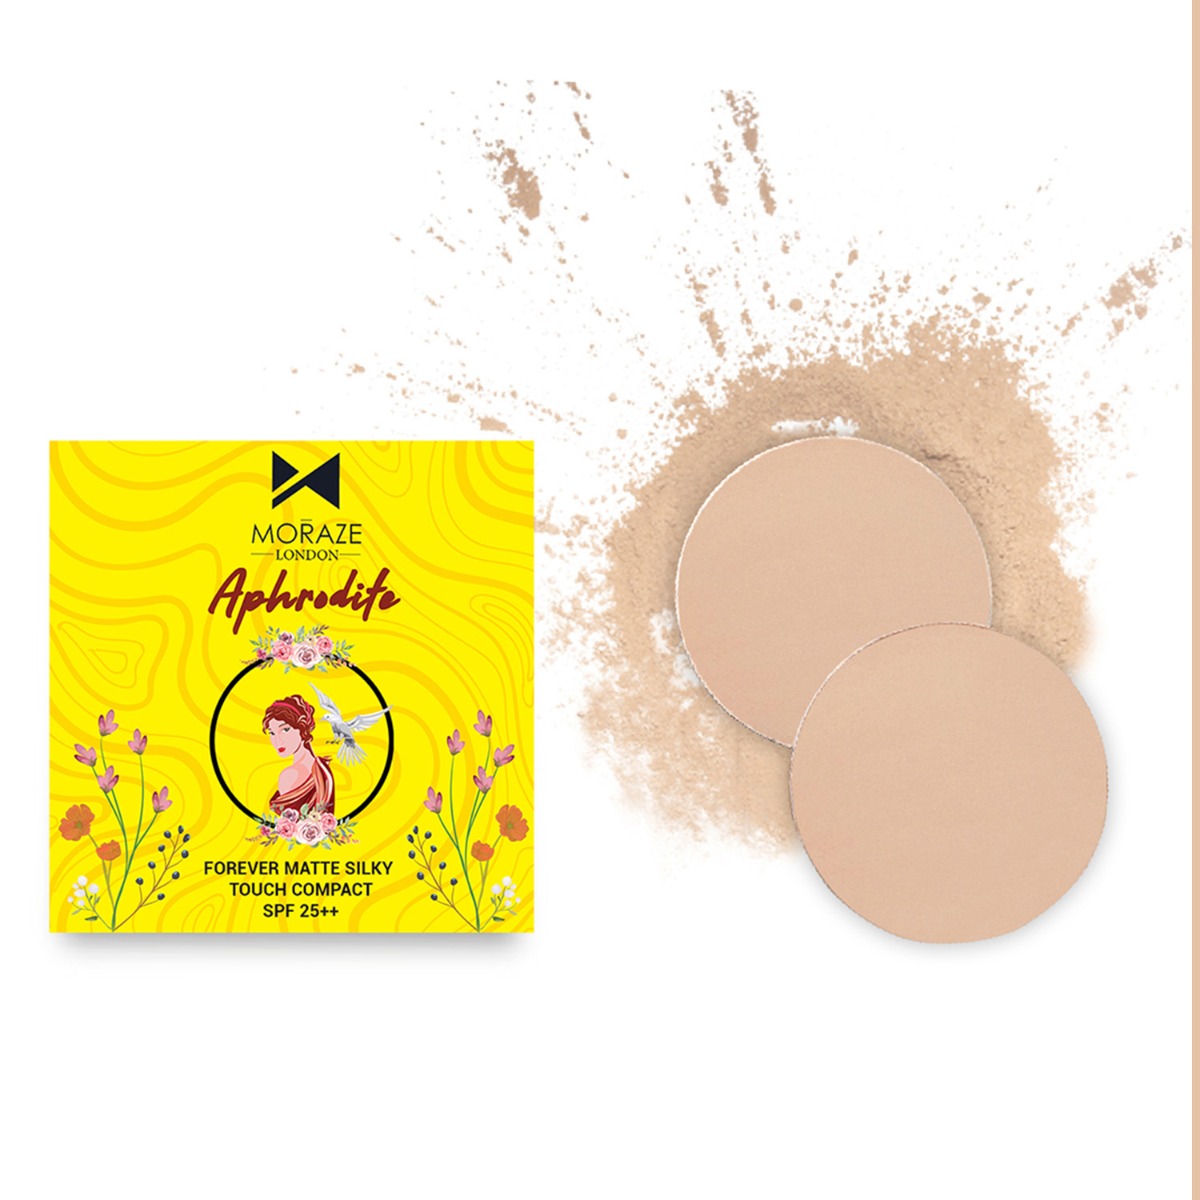 Moraze Aphrodite Forever Matte Silky Touch Compact, 9gm